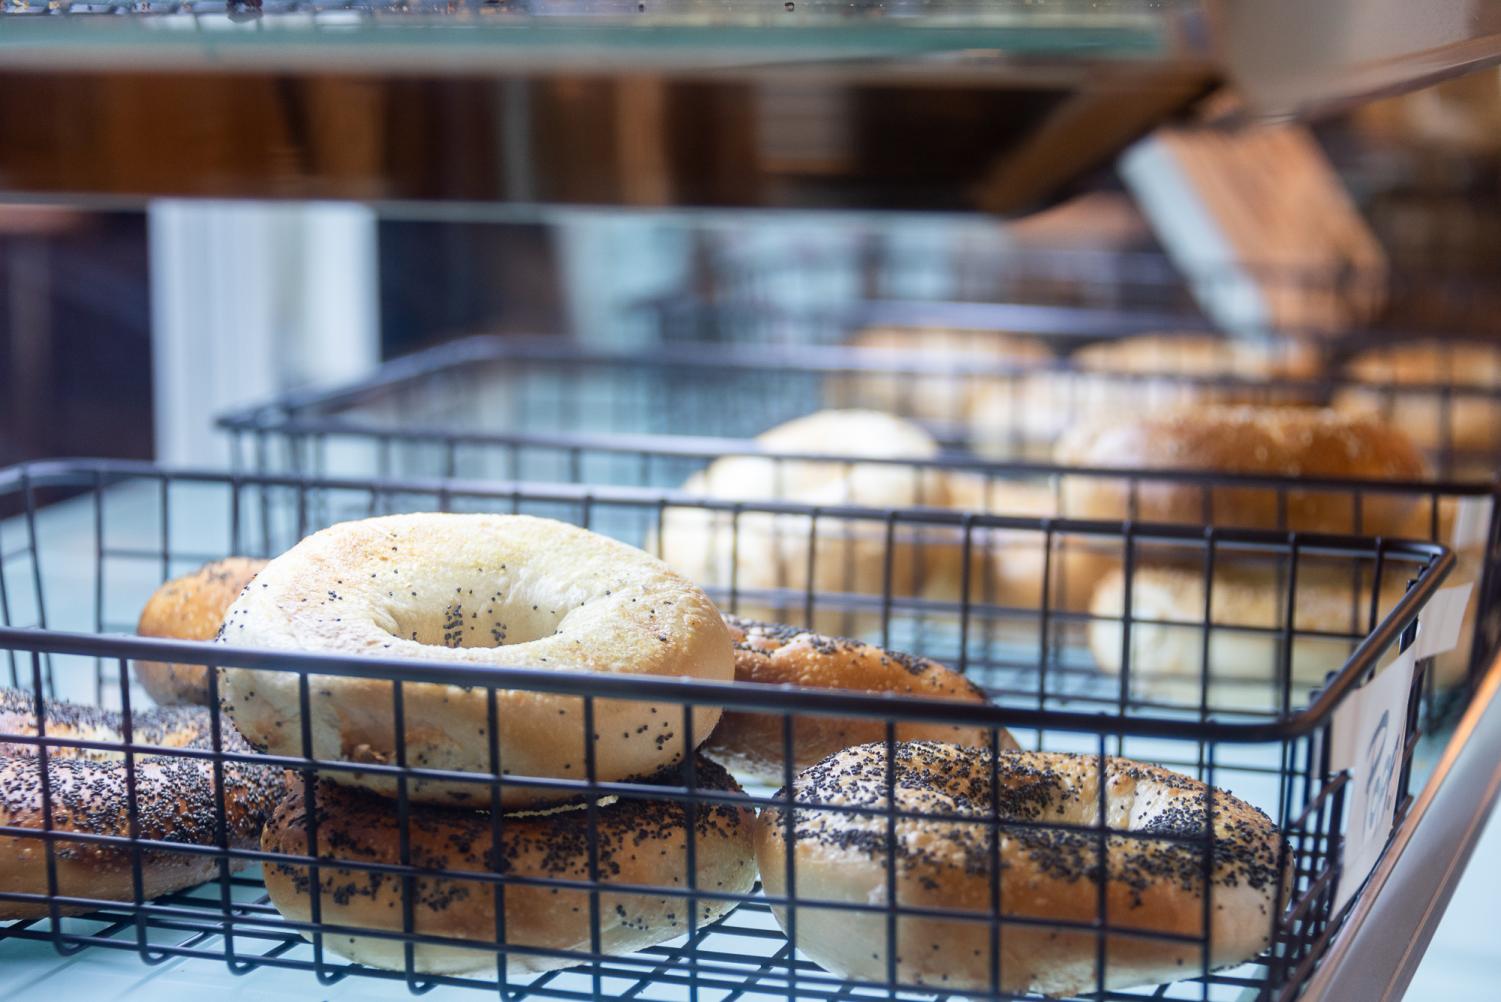 New+restaurant+brings+New+York-style+bagels+to+Lexington